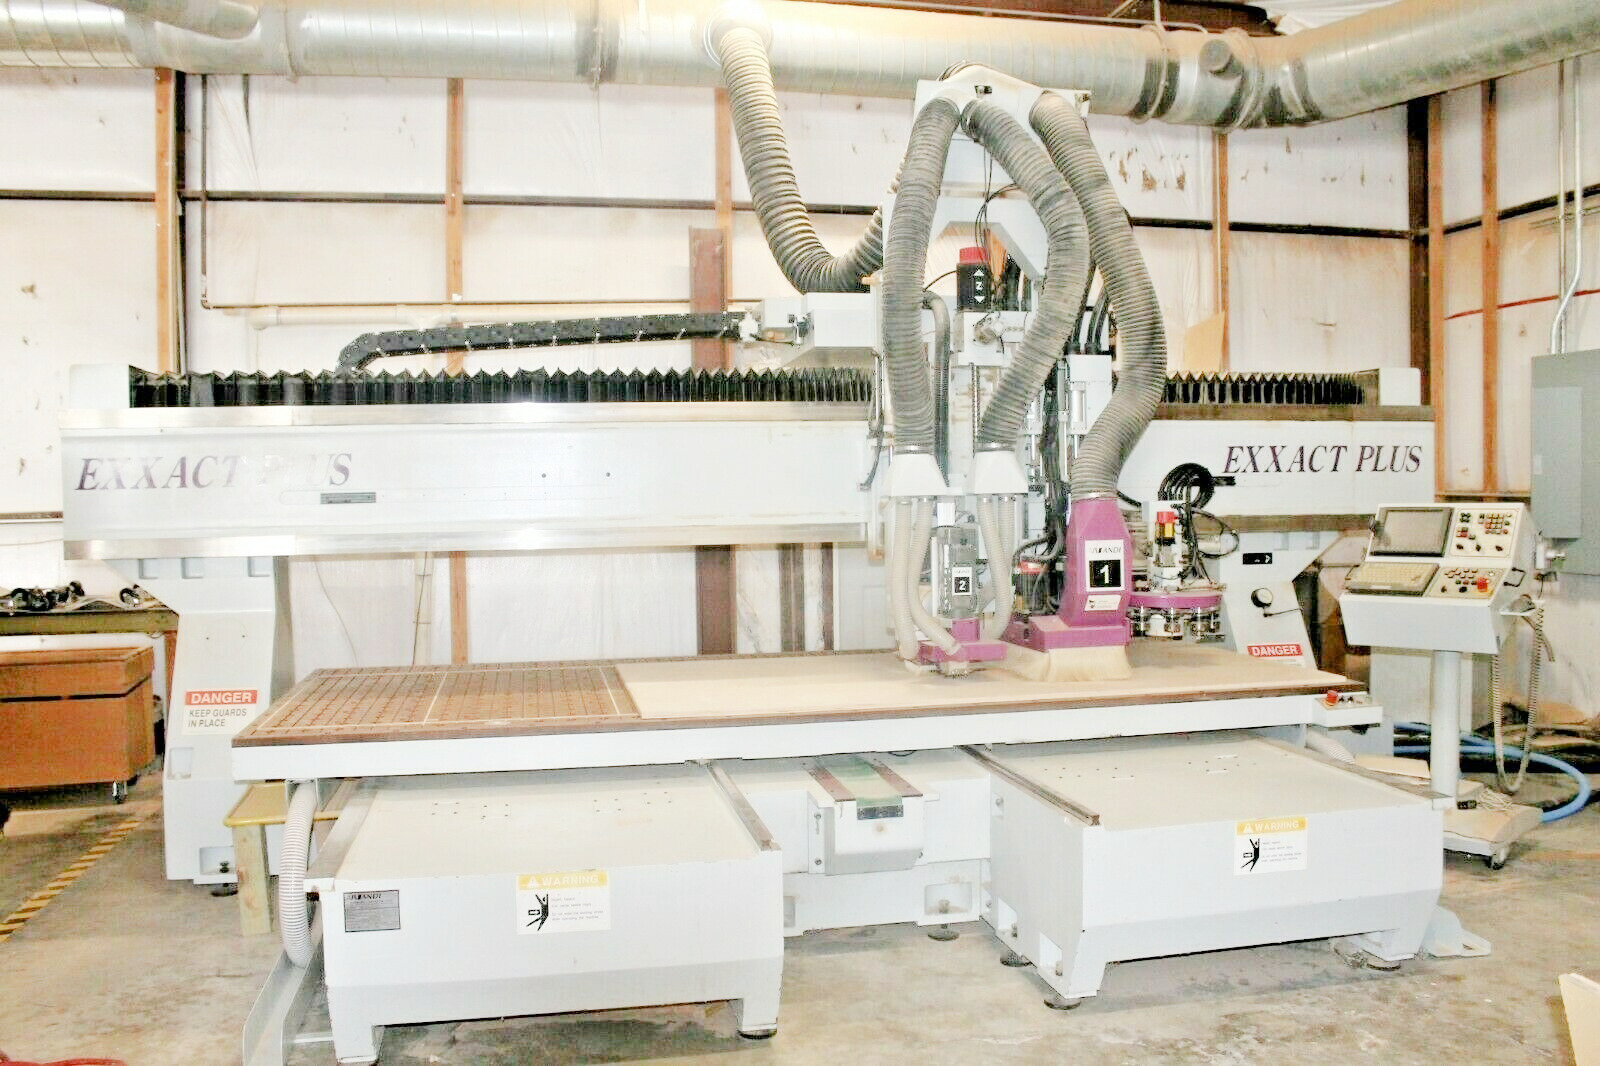 Anderson Exxact 5 x 12′ ATC MDrill Horizontal CNC Router (used) Item # UE-062022G (Indiana)